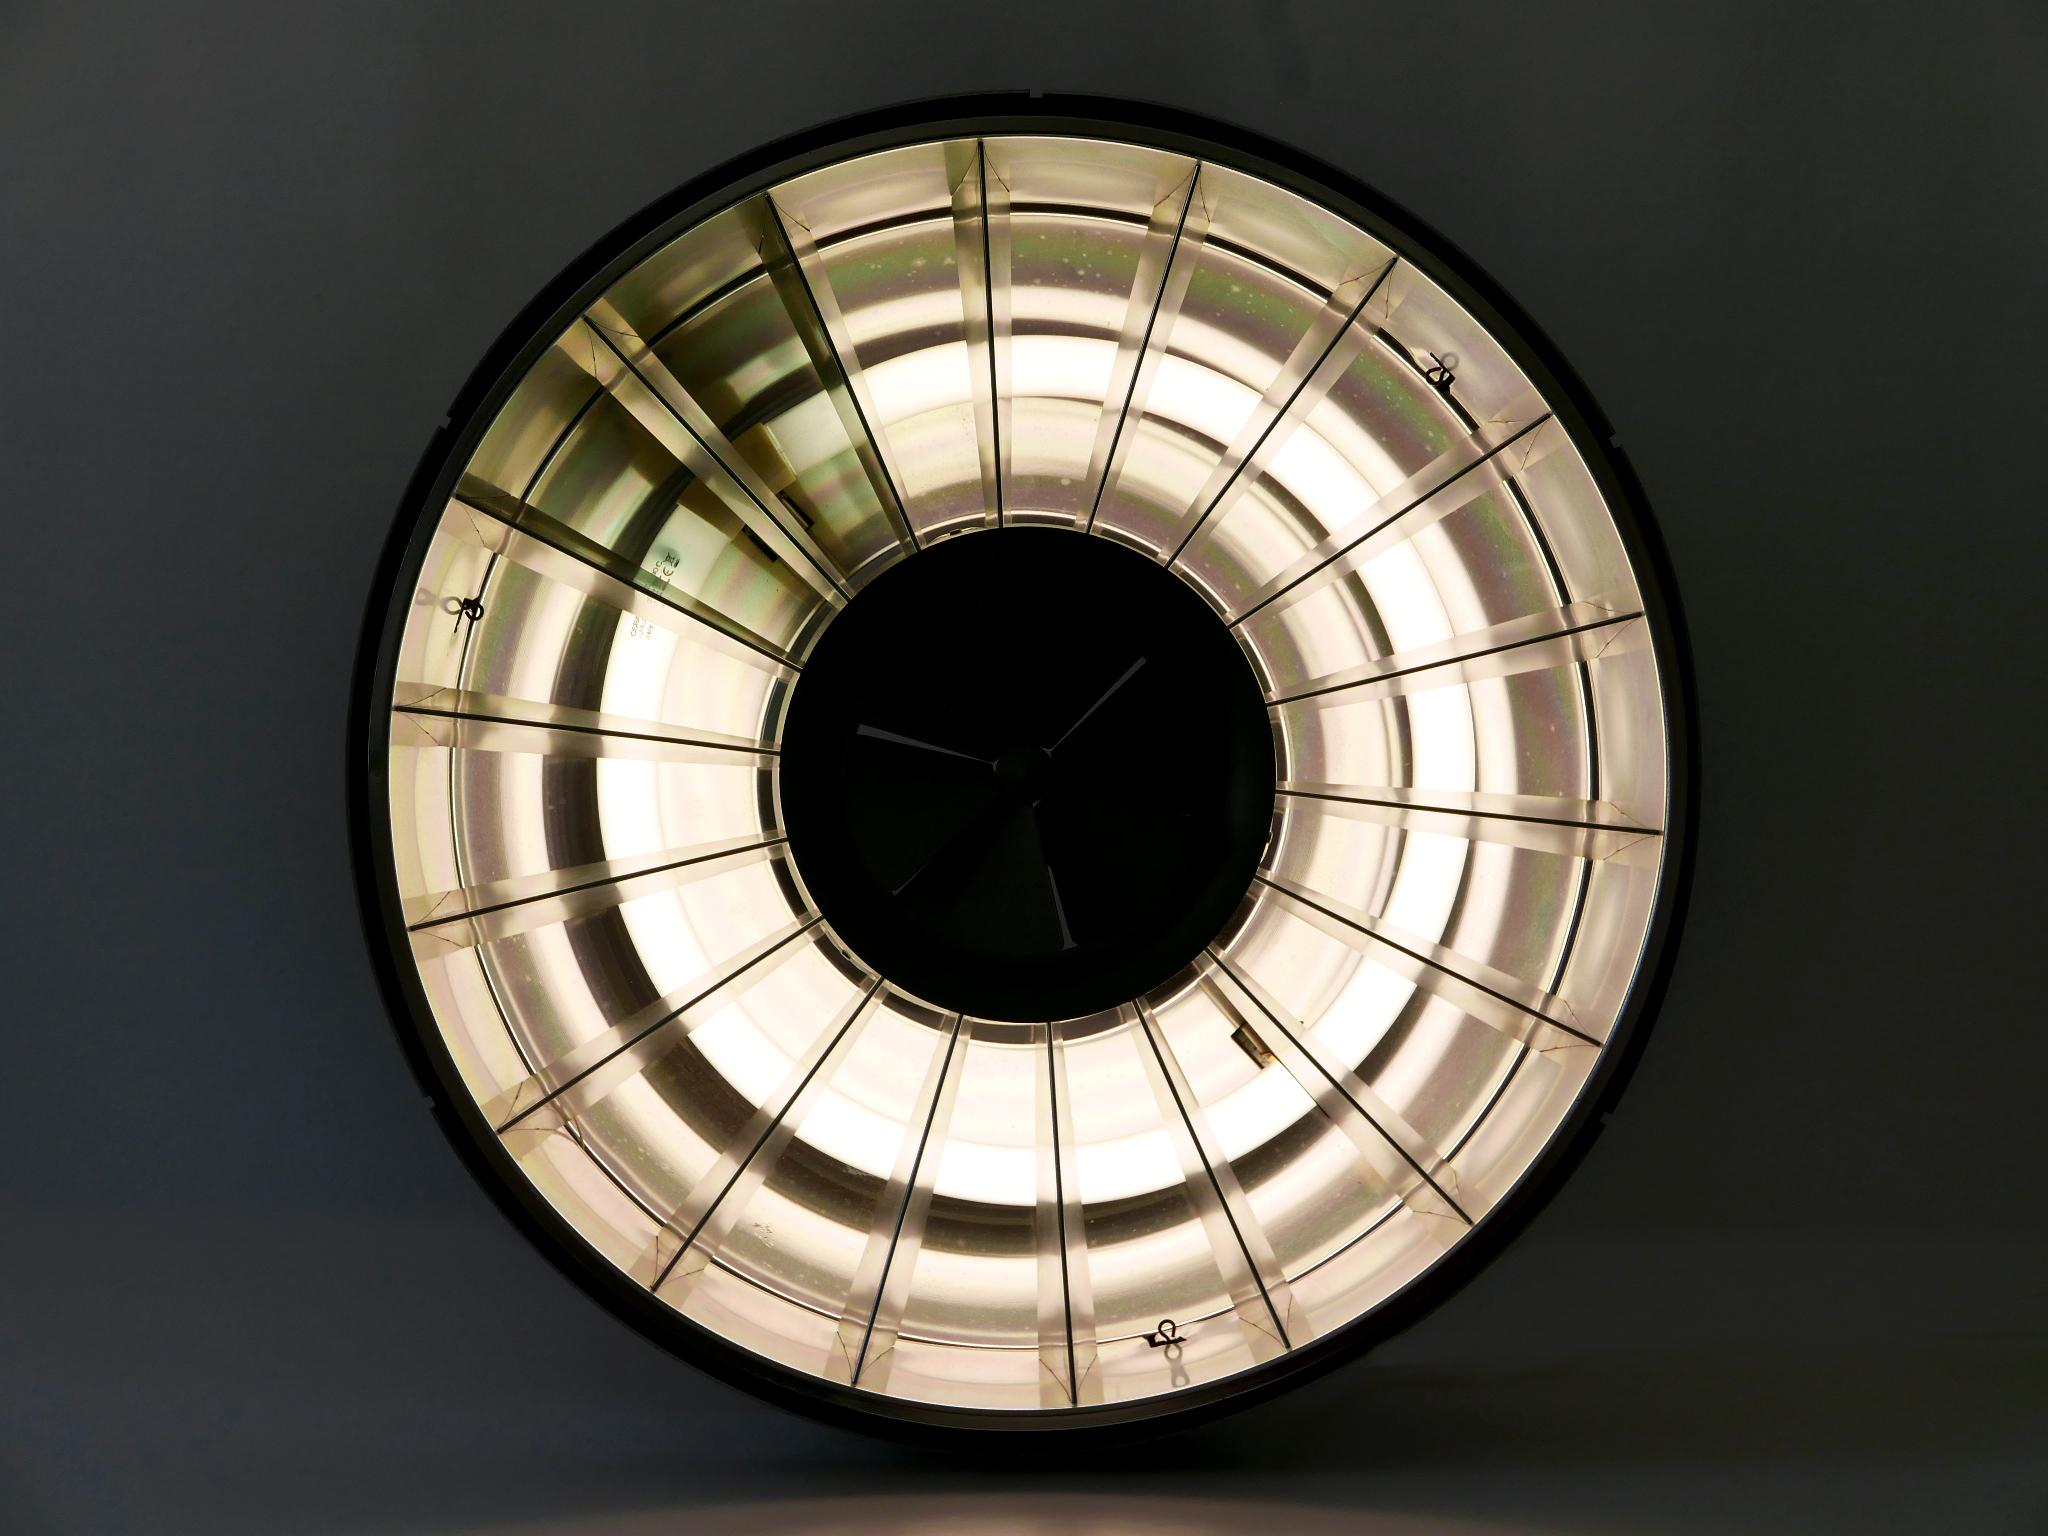 Rare, elegant, large & highly decorative Modernist Ceiling Lights or Sconces. Originally designed by Britisch Star Architect Richard Rogers for Lloyds headquarters in London, built by him between 1977 and 1987. 

6 x Identical fixtures are